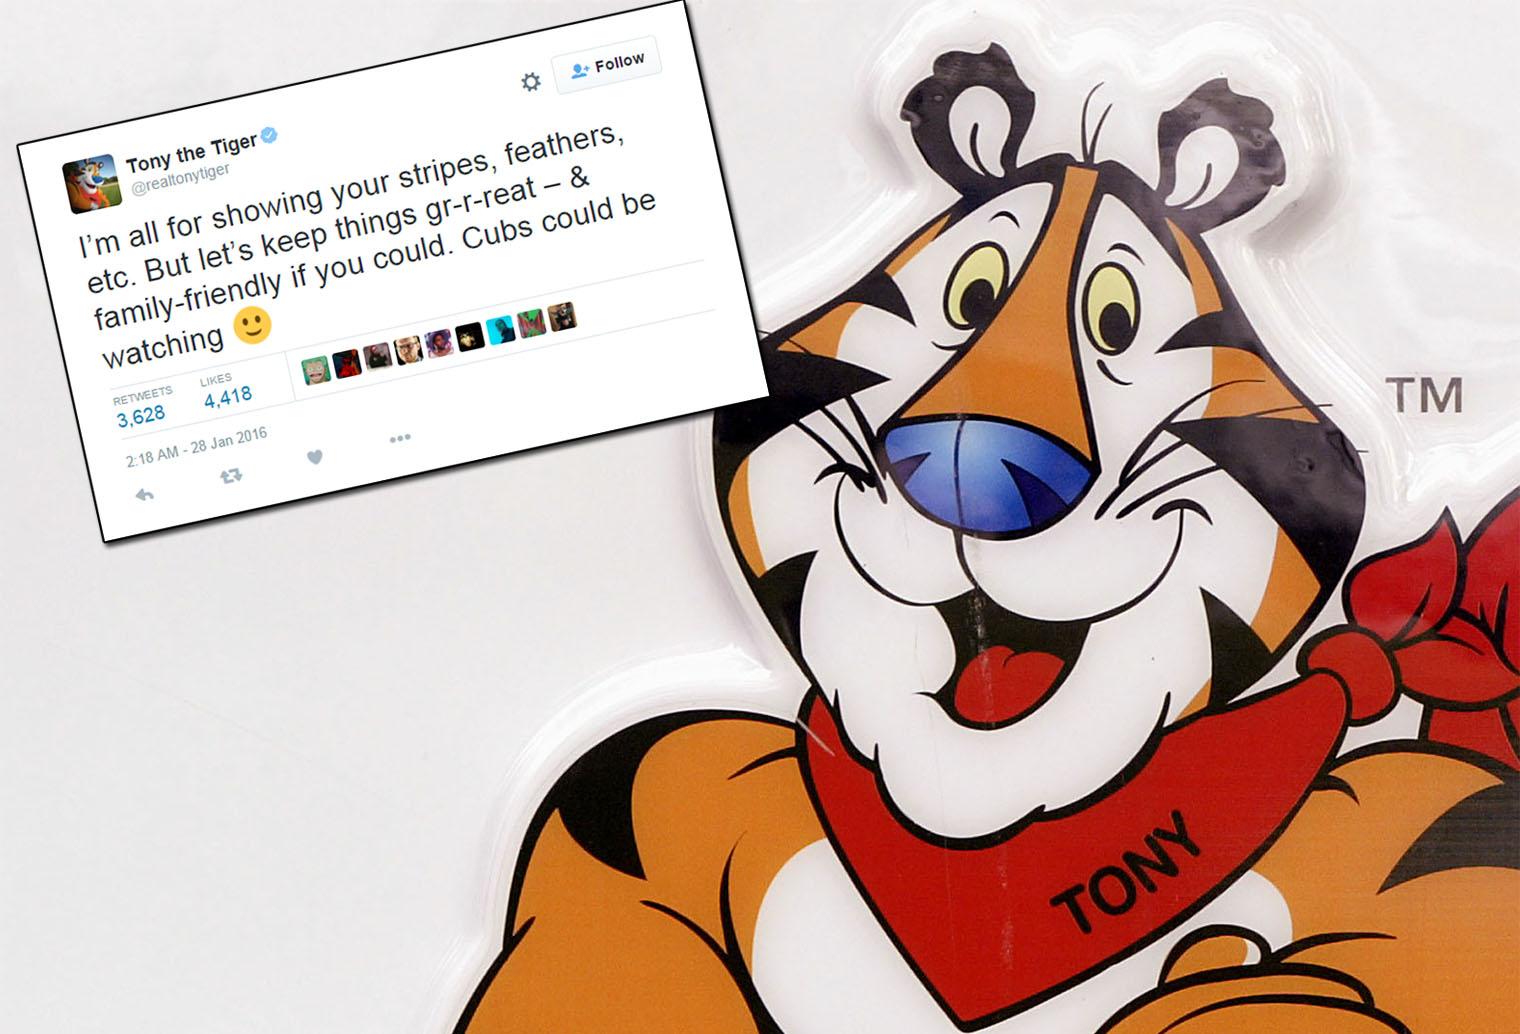 Furry Public - Fictional Kellogg's mascot Tony the Tiger has been forced to ...